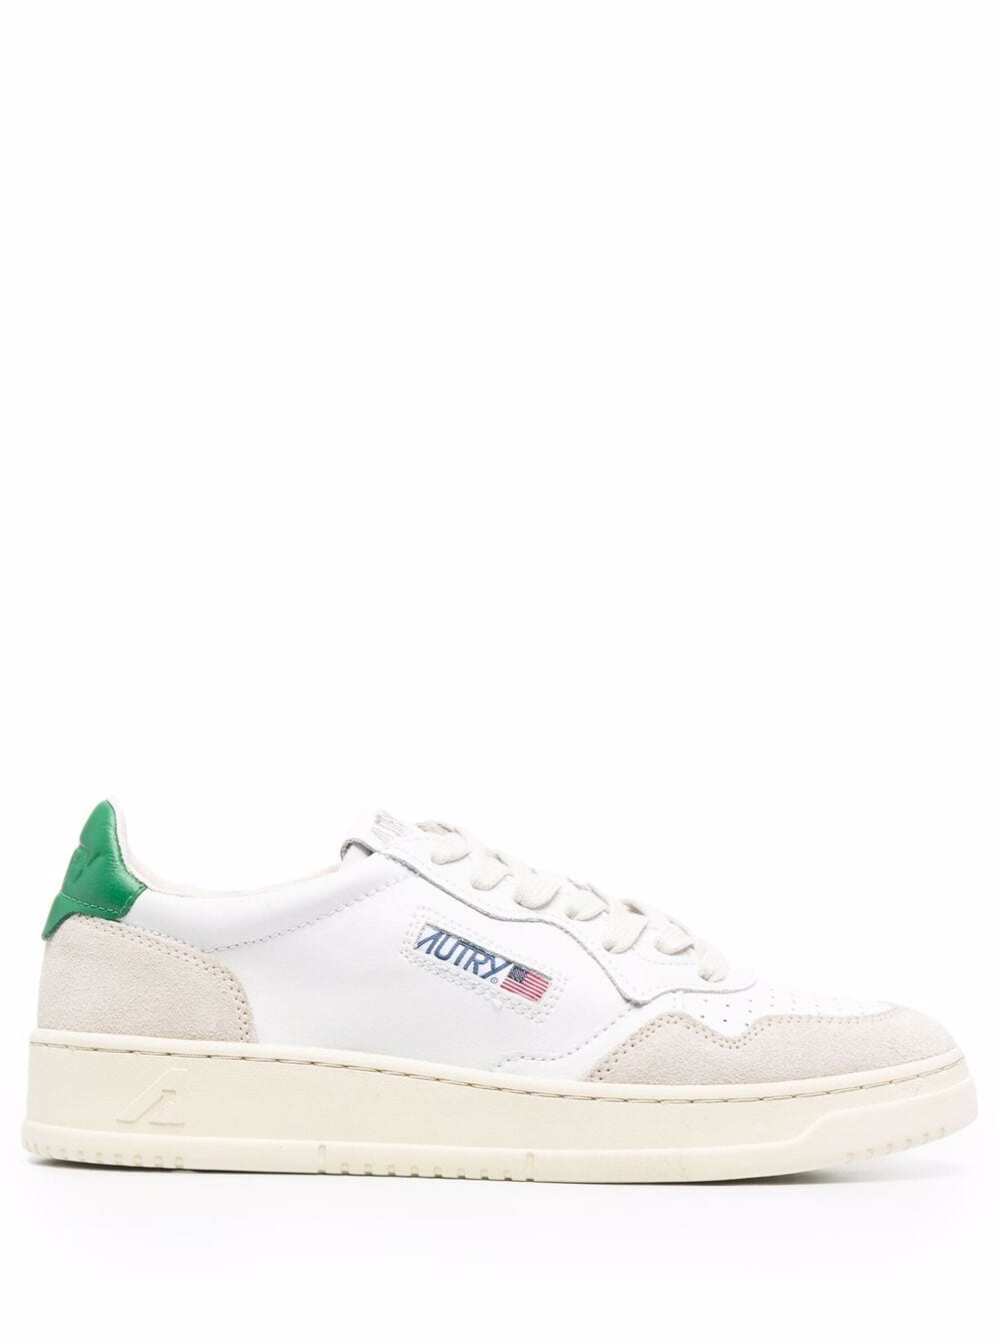 medalist Low White Sneakers With Suede Inserts And Contrasting Heel Tab In Leather Man